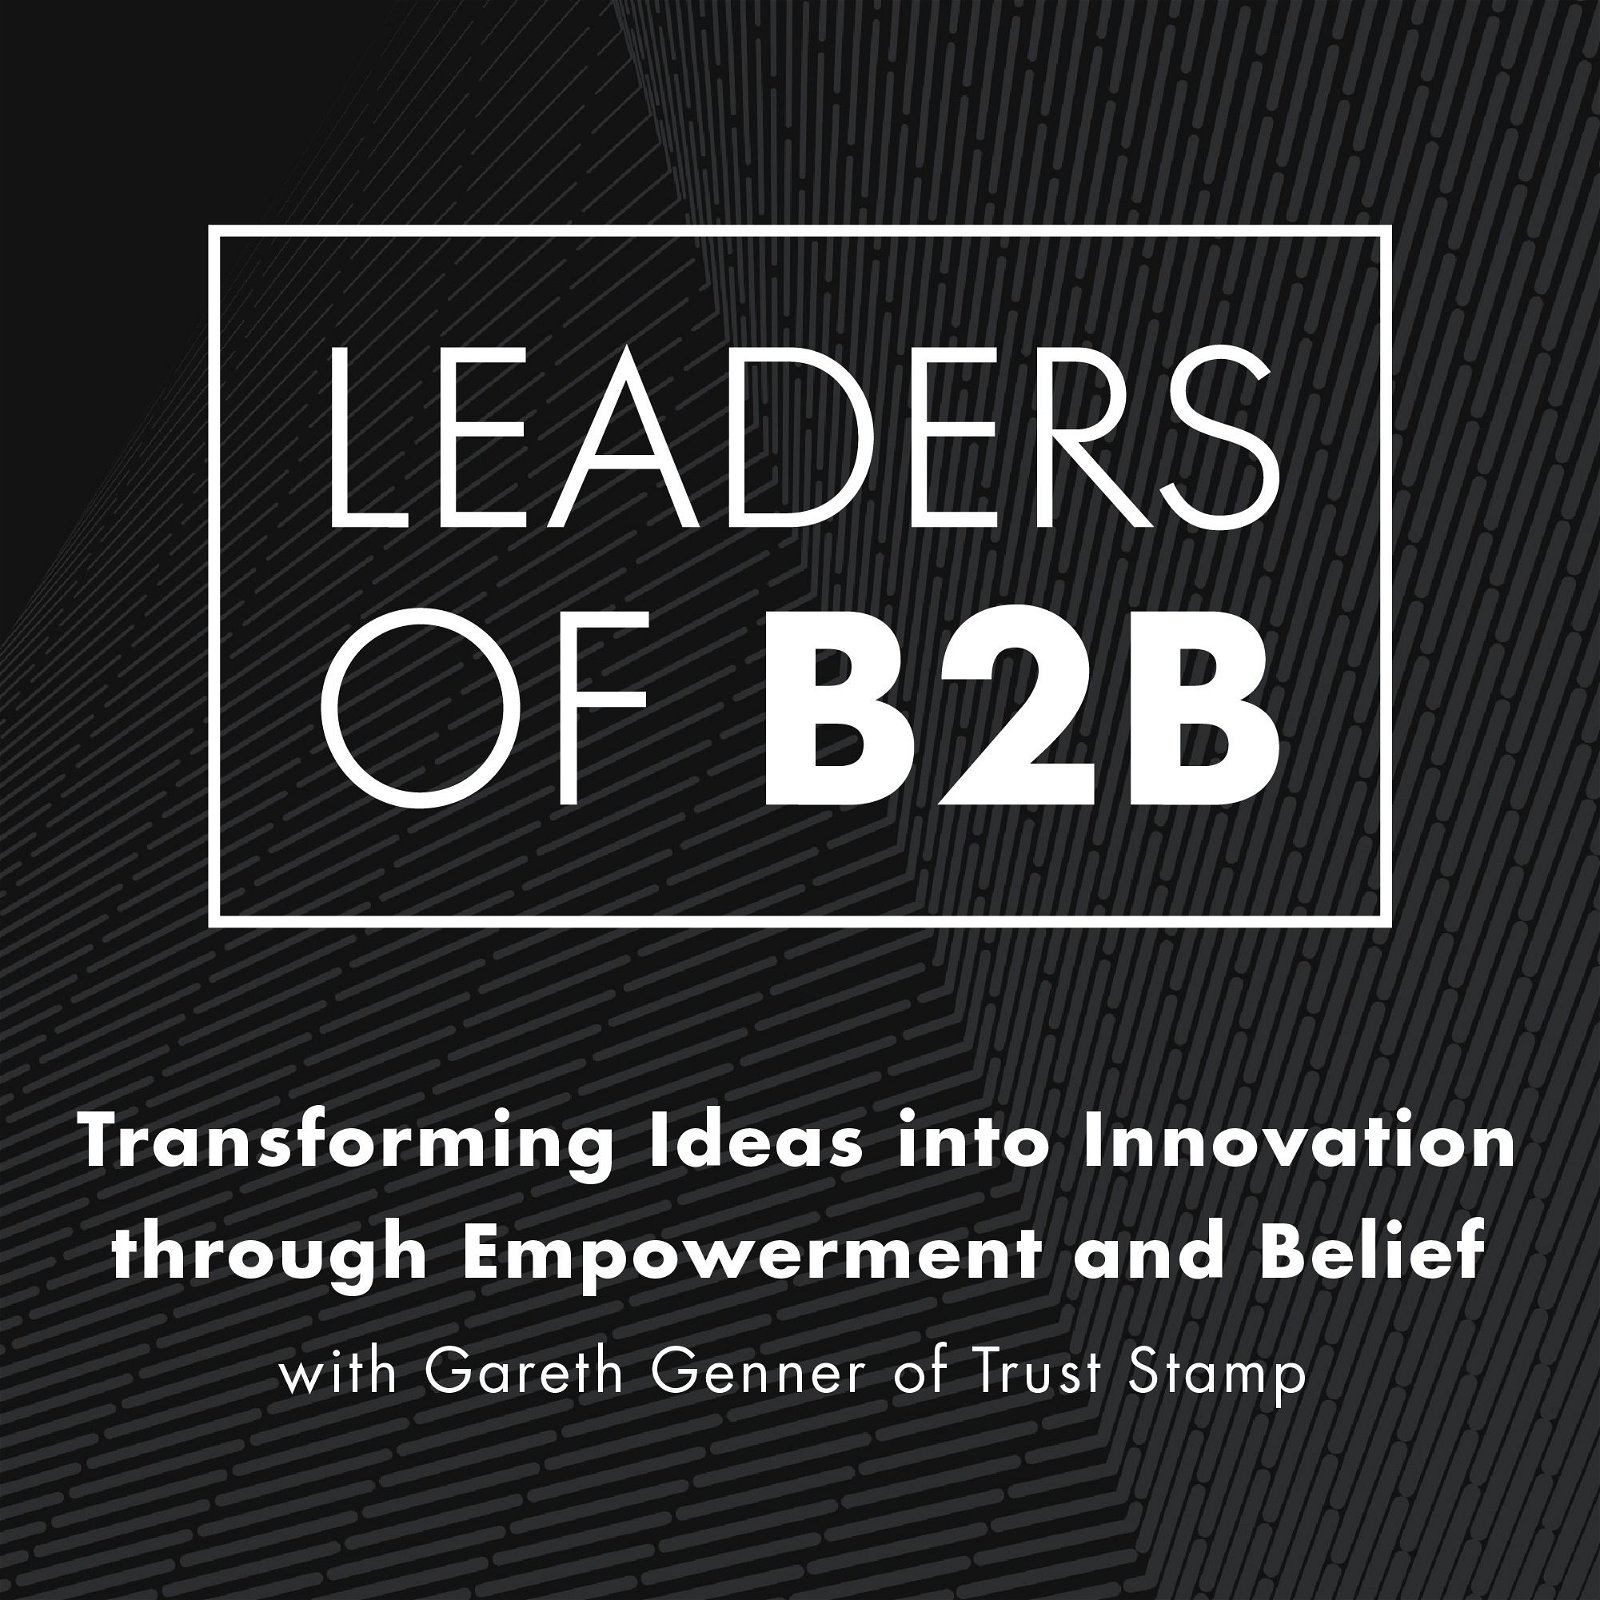 Transforming Ideas into Innovation through Empowerment and Belief, with Gareth Genner of Trust Stamp